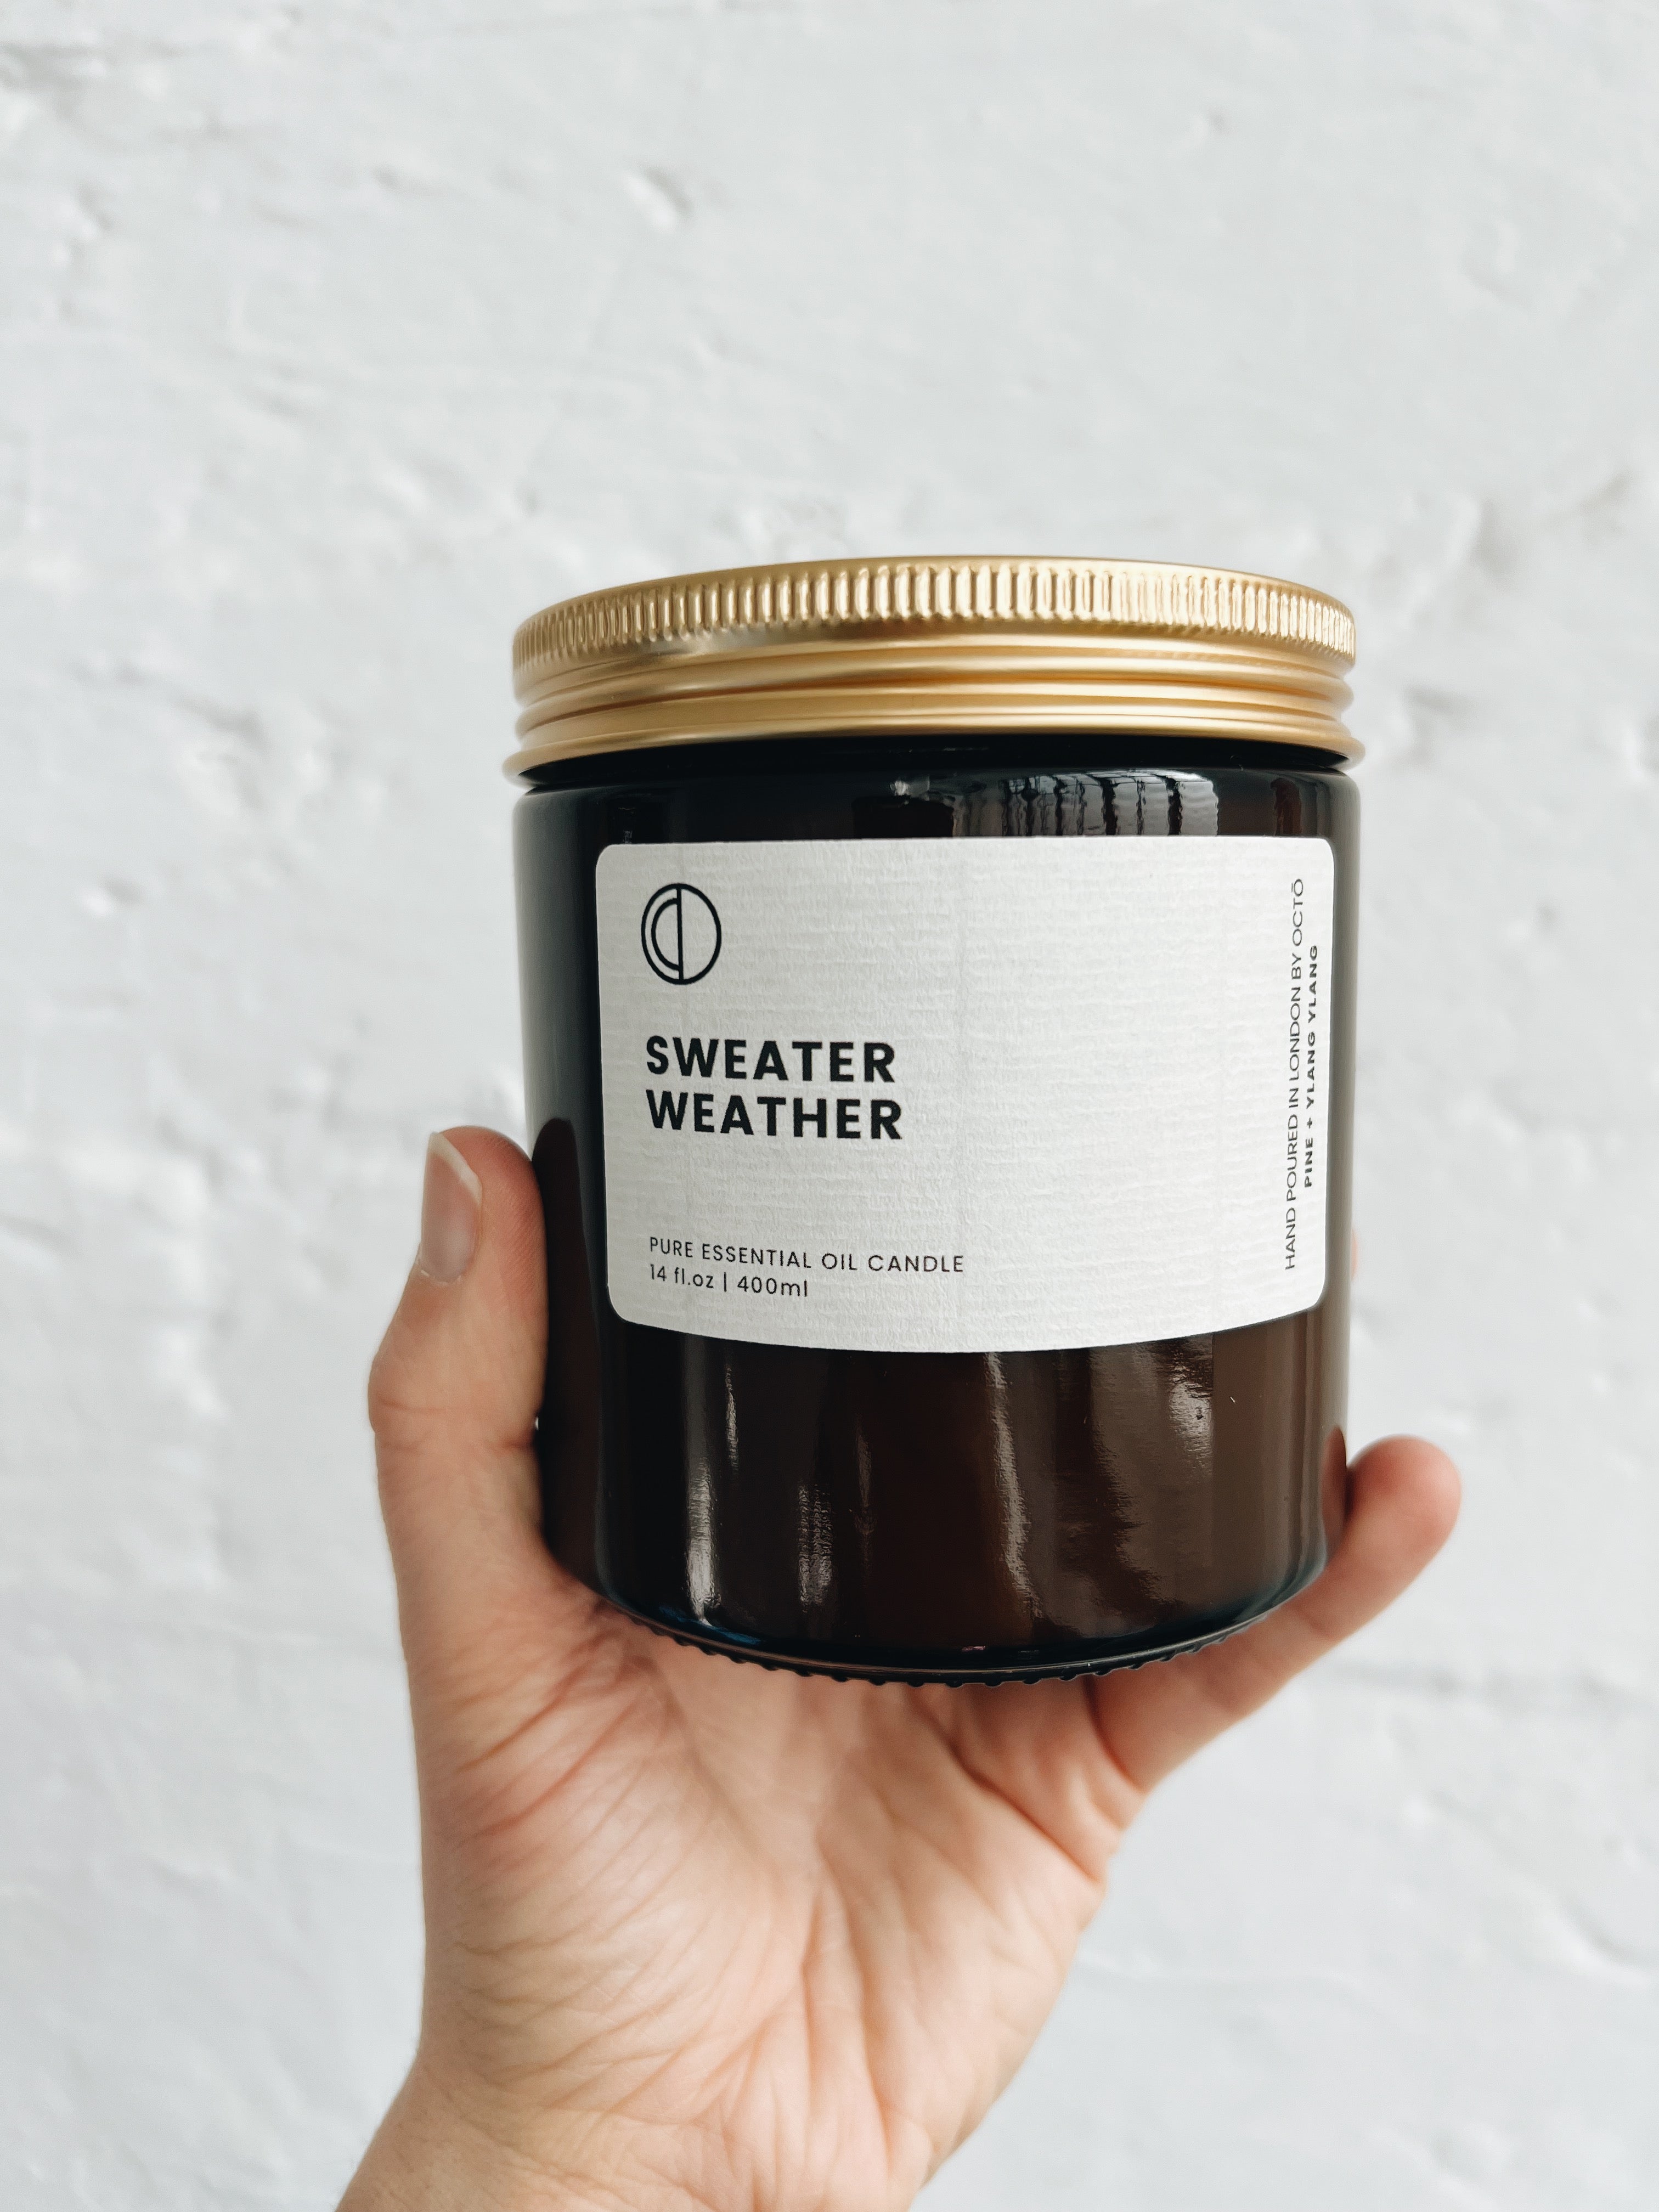 Sweater weather candle